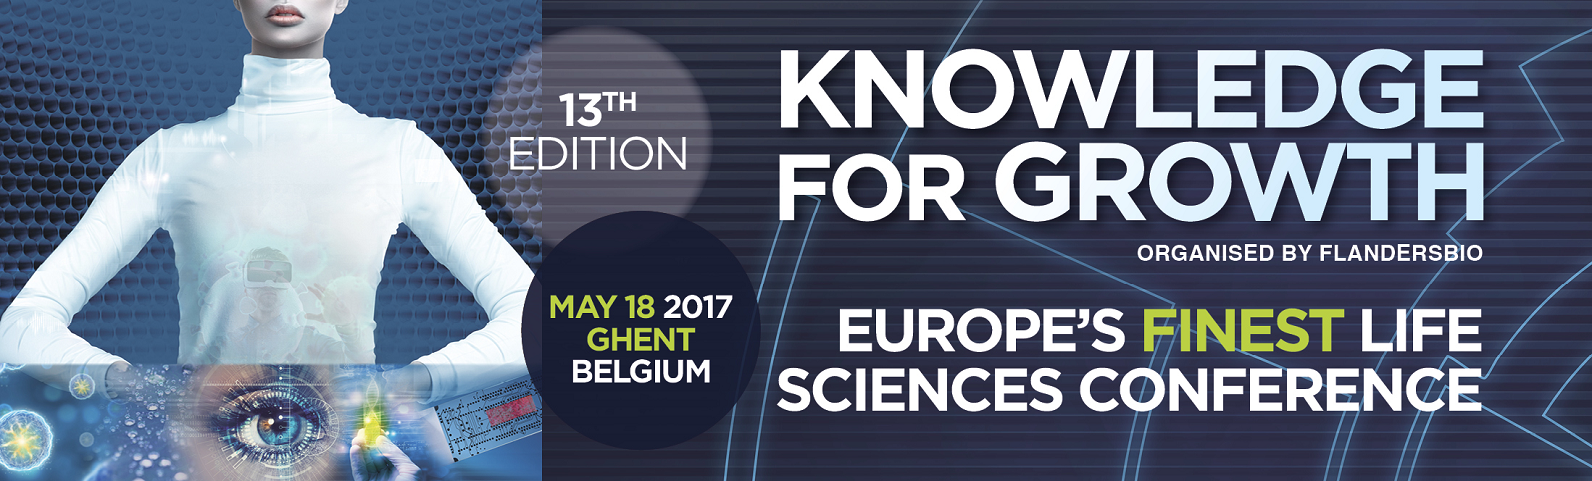 Knowledge for Growth 2017